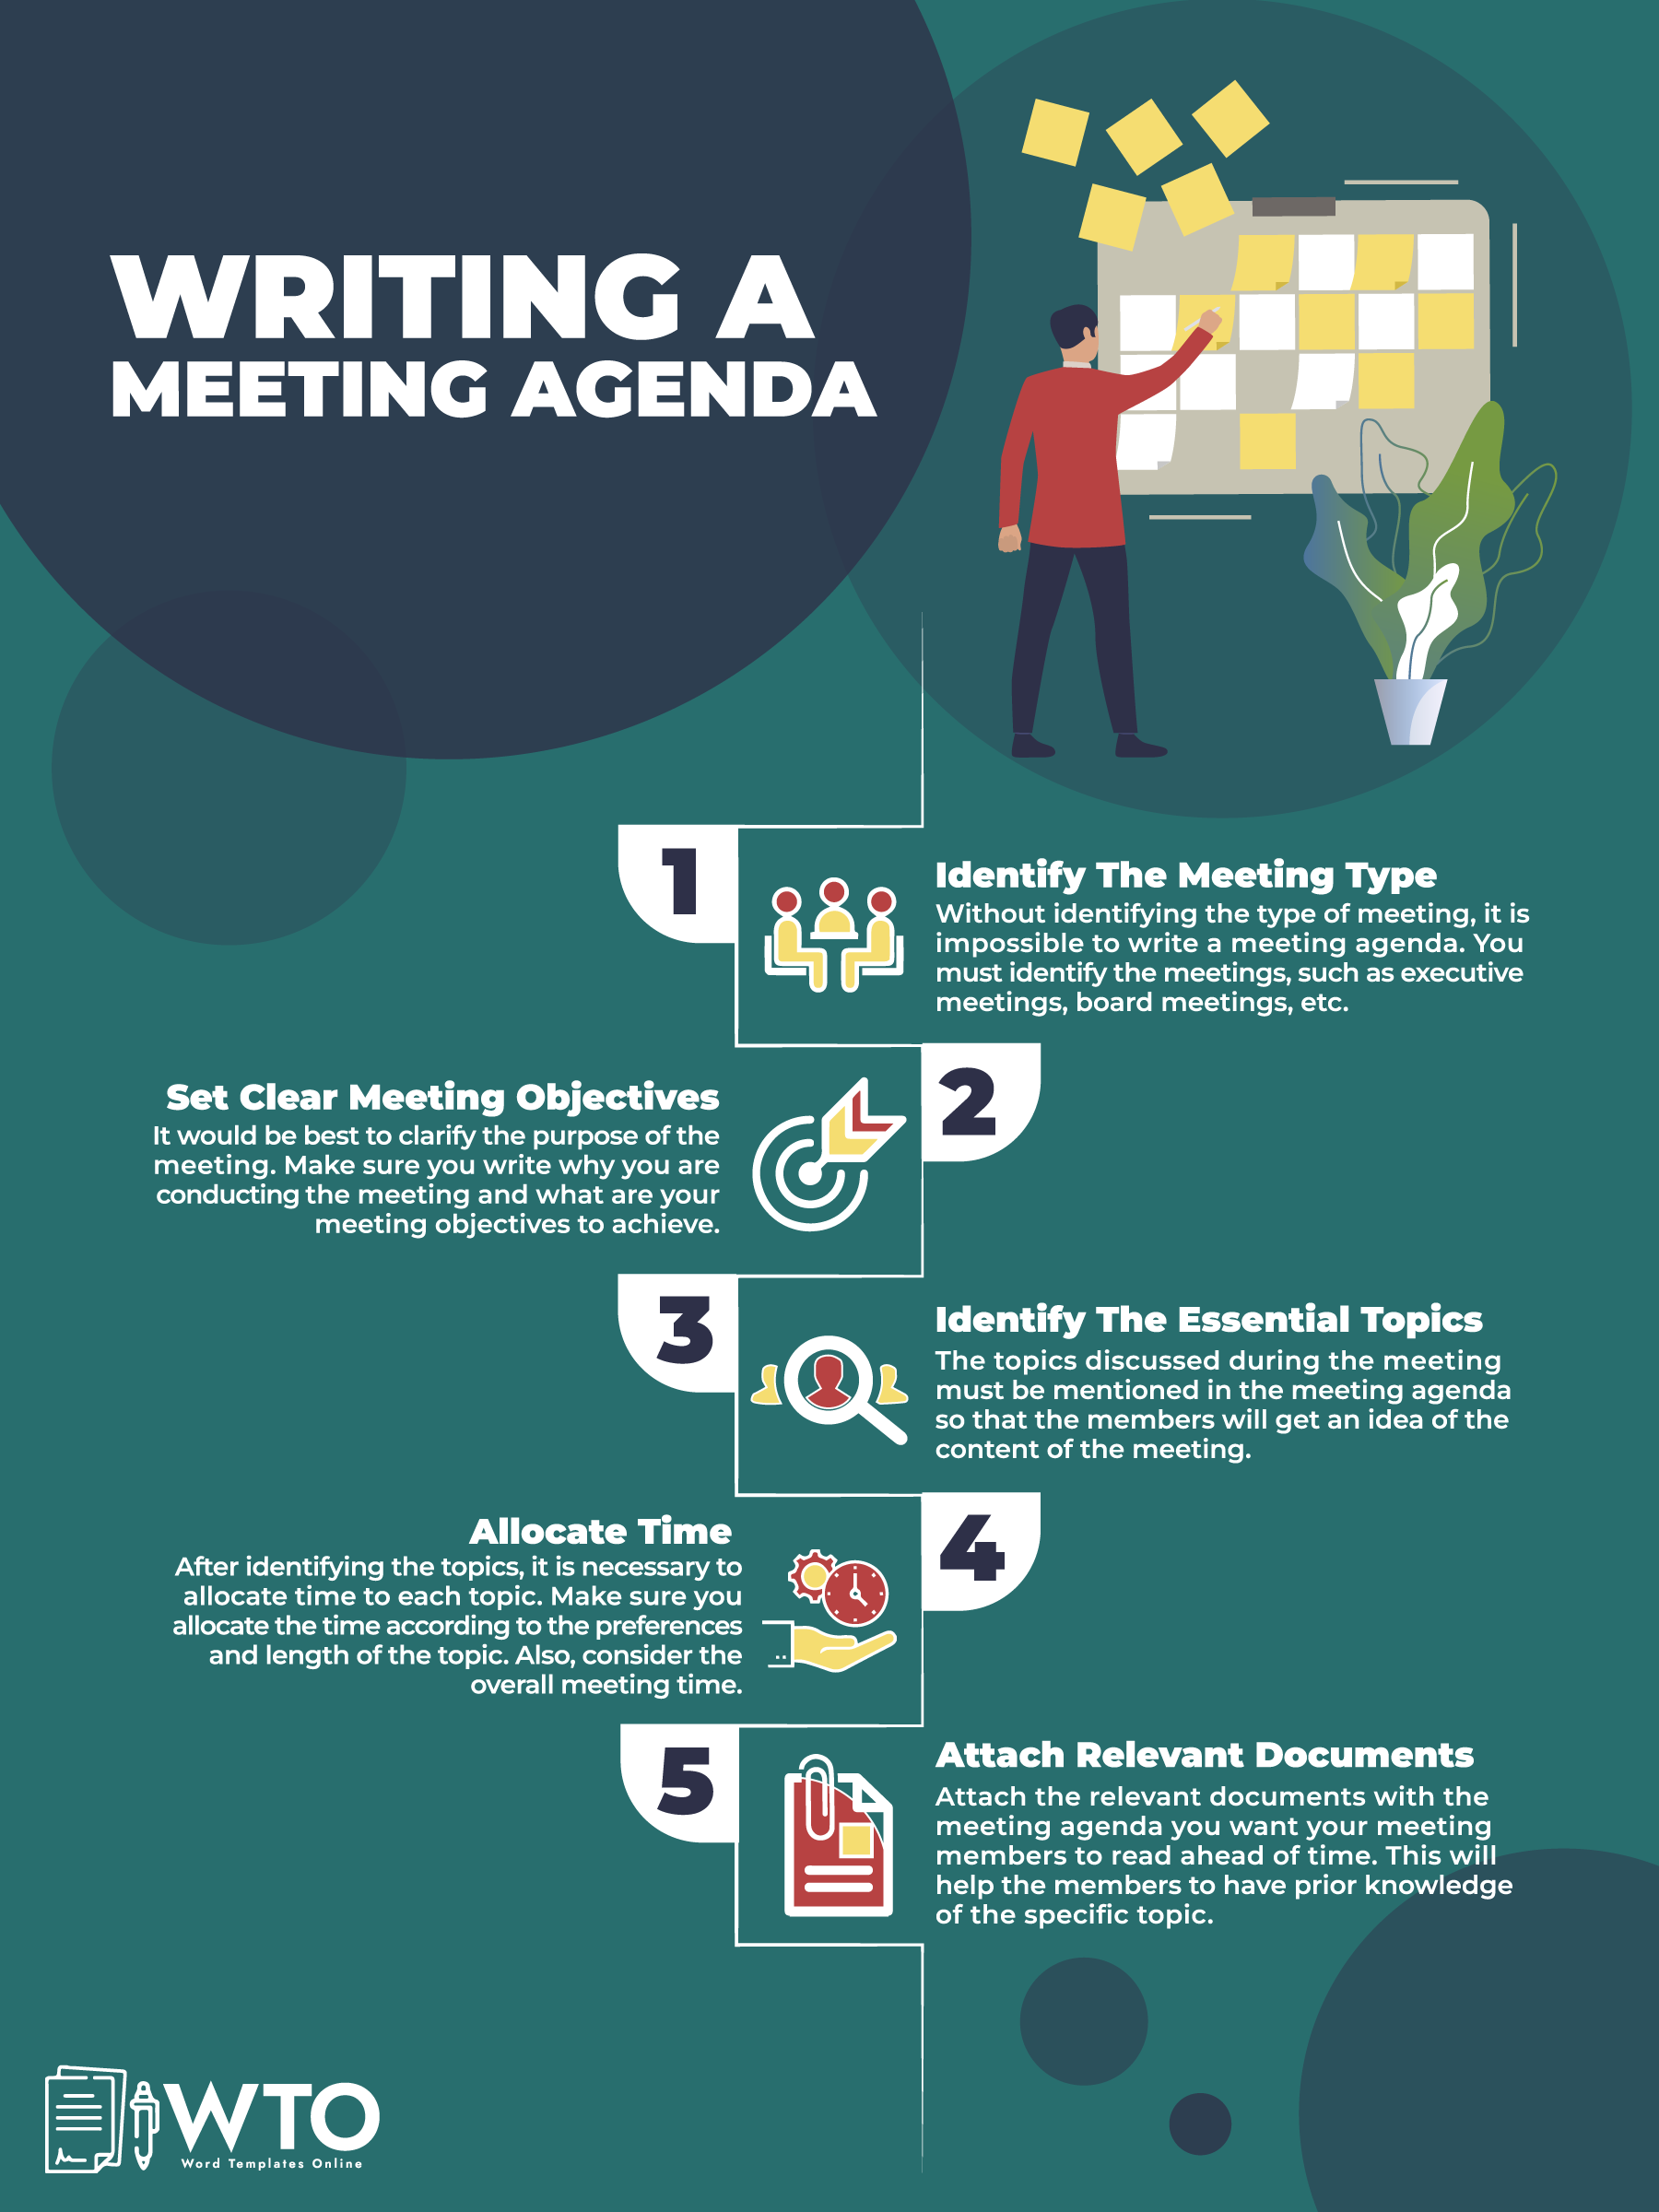 This infographic is about writing a meeting agenda.